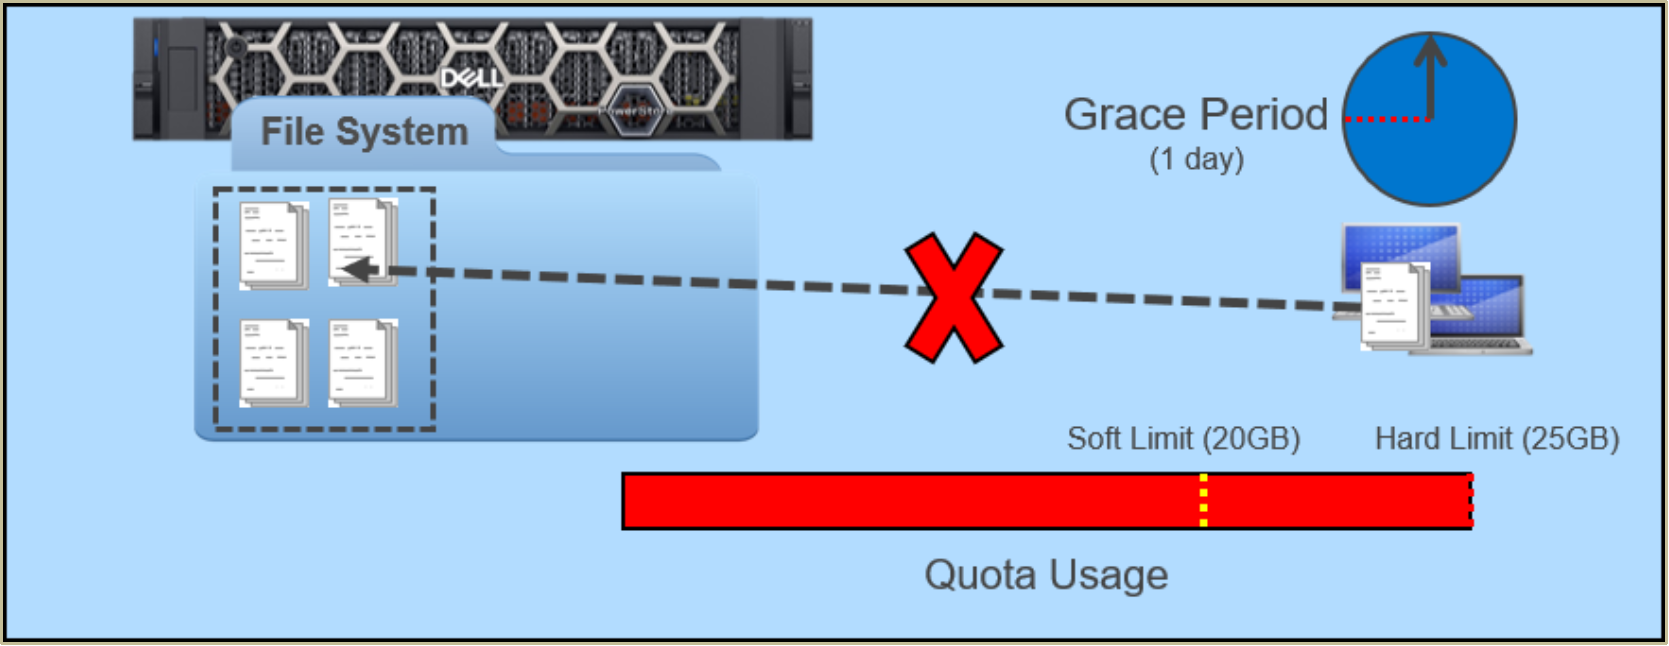 A diagram showing how a quota works after the soft limit has been exceeded and hard limit has been reached.